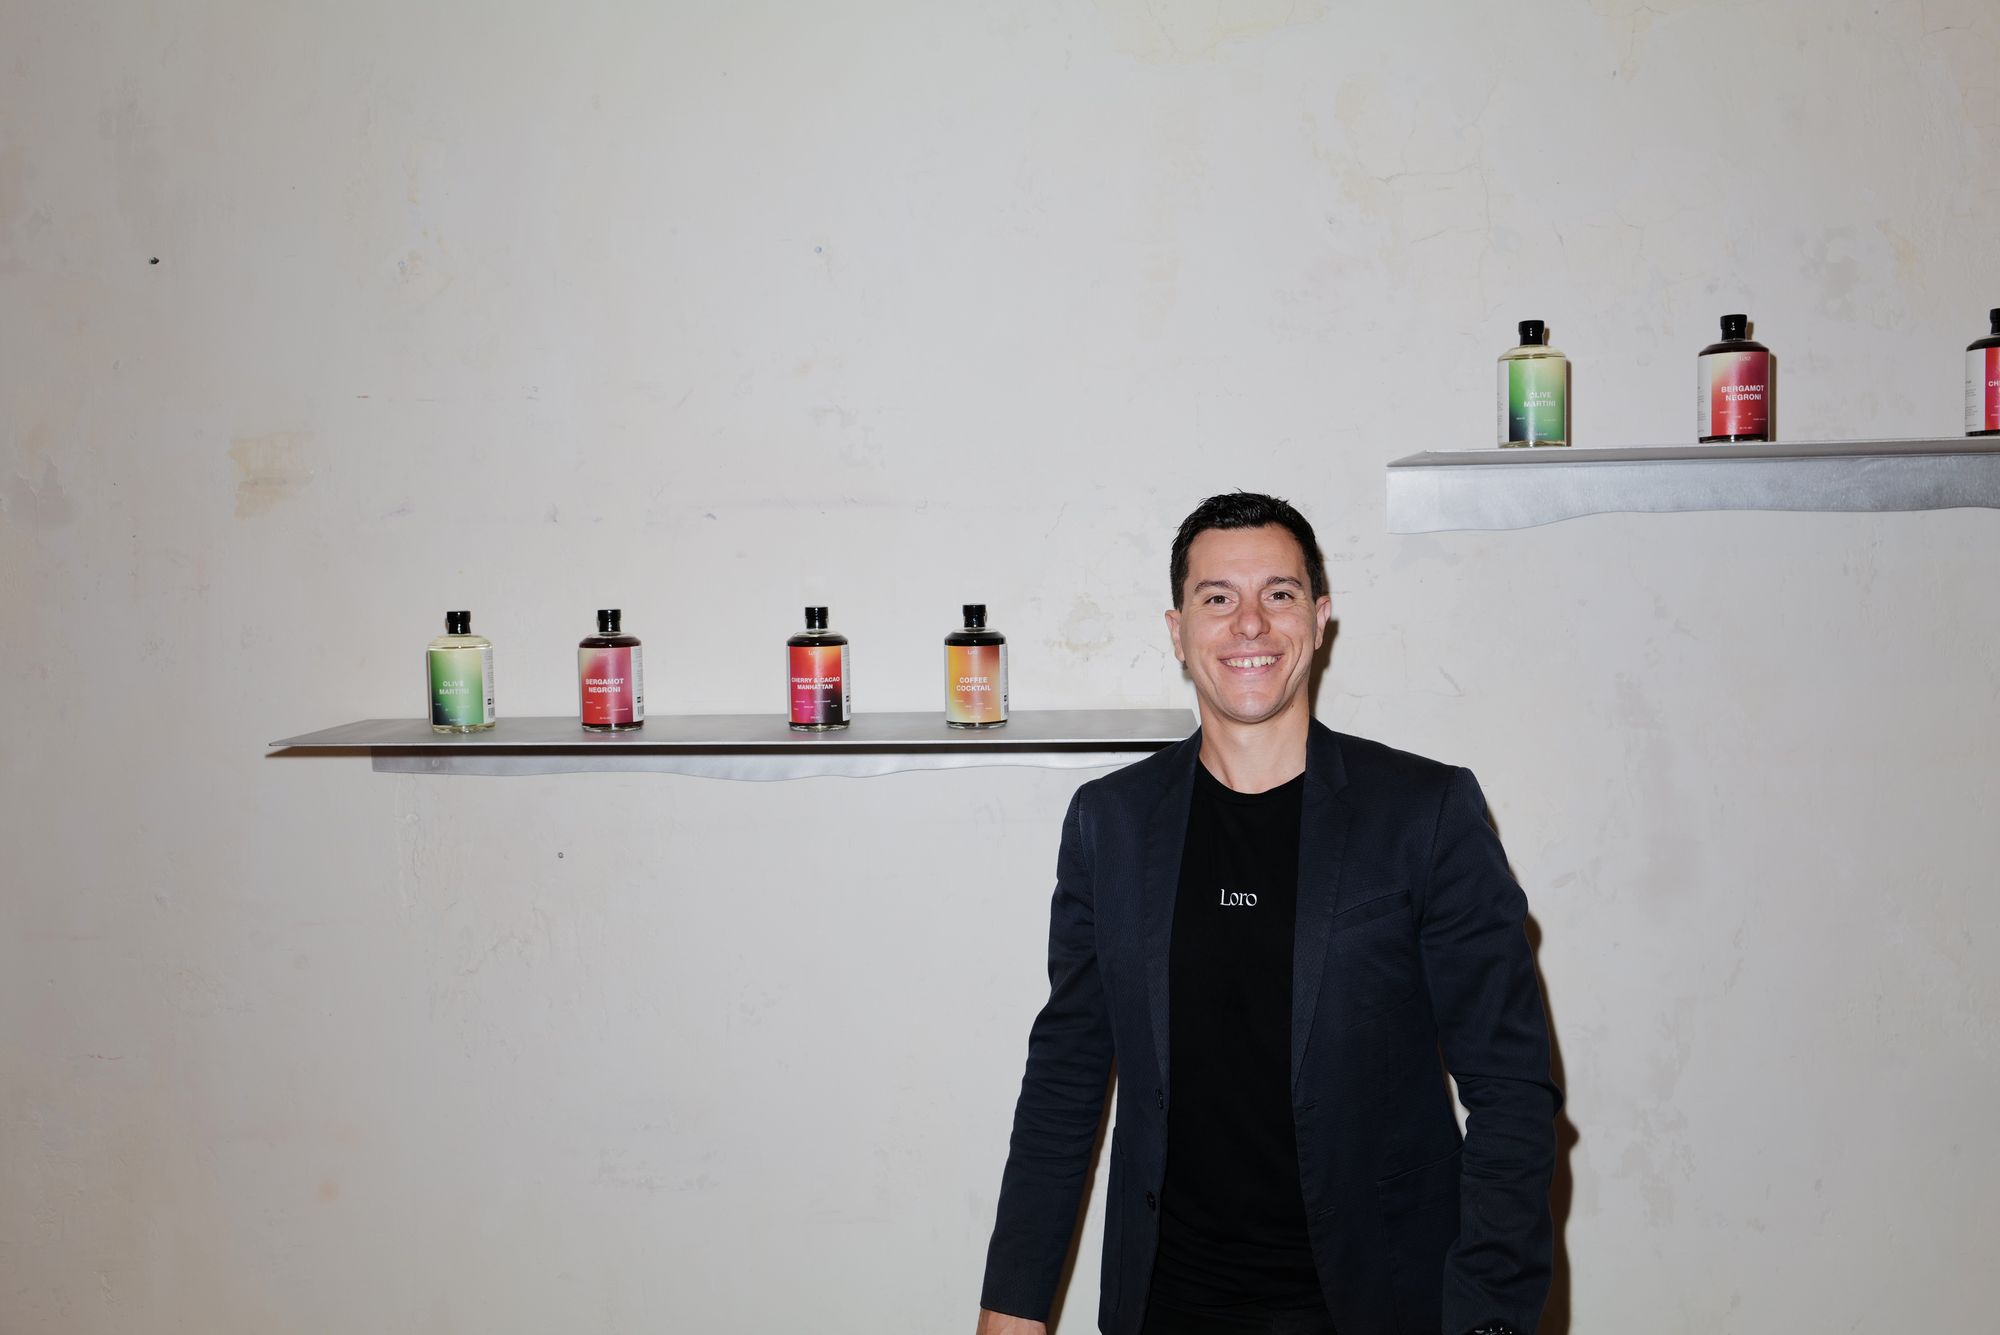 Orlando Marzo with his bottled cocktail brand, Loro. Photo: Supplied